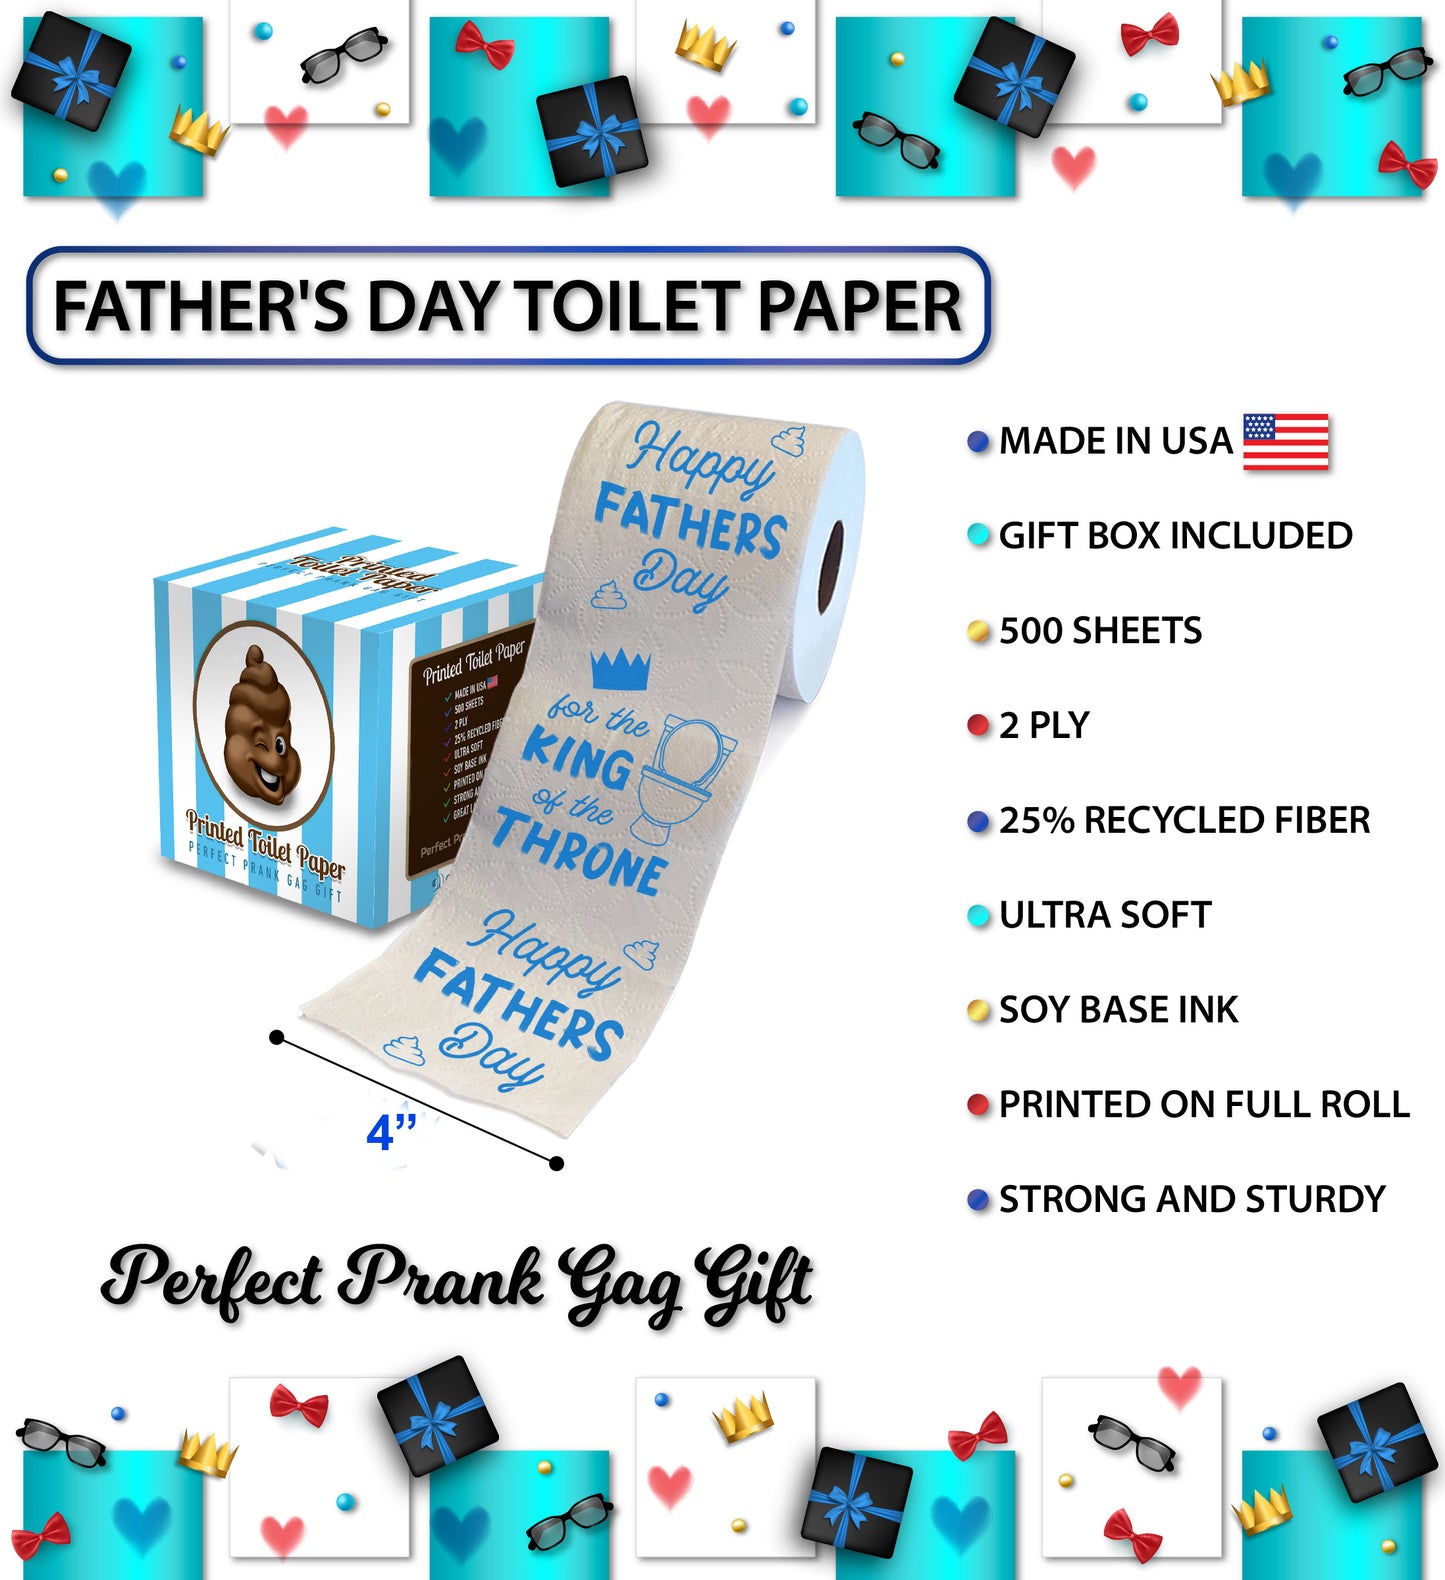 Printed TP Happy Fathers Day For the King of the Throne Toilet Paper, 500 Sheet